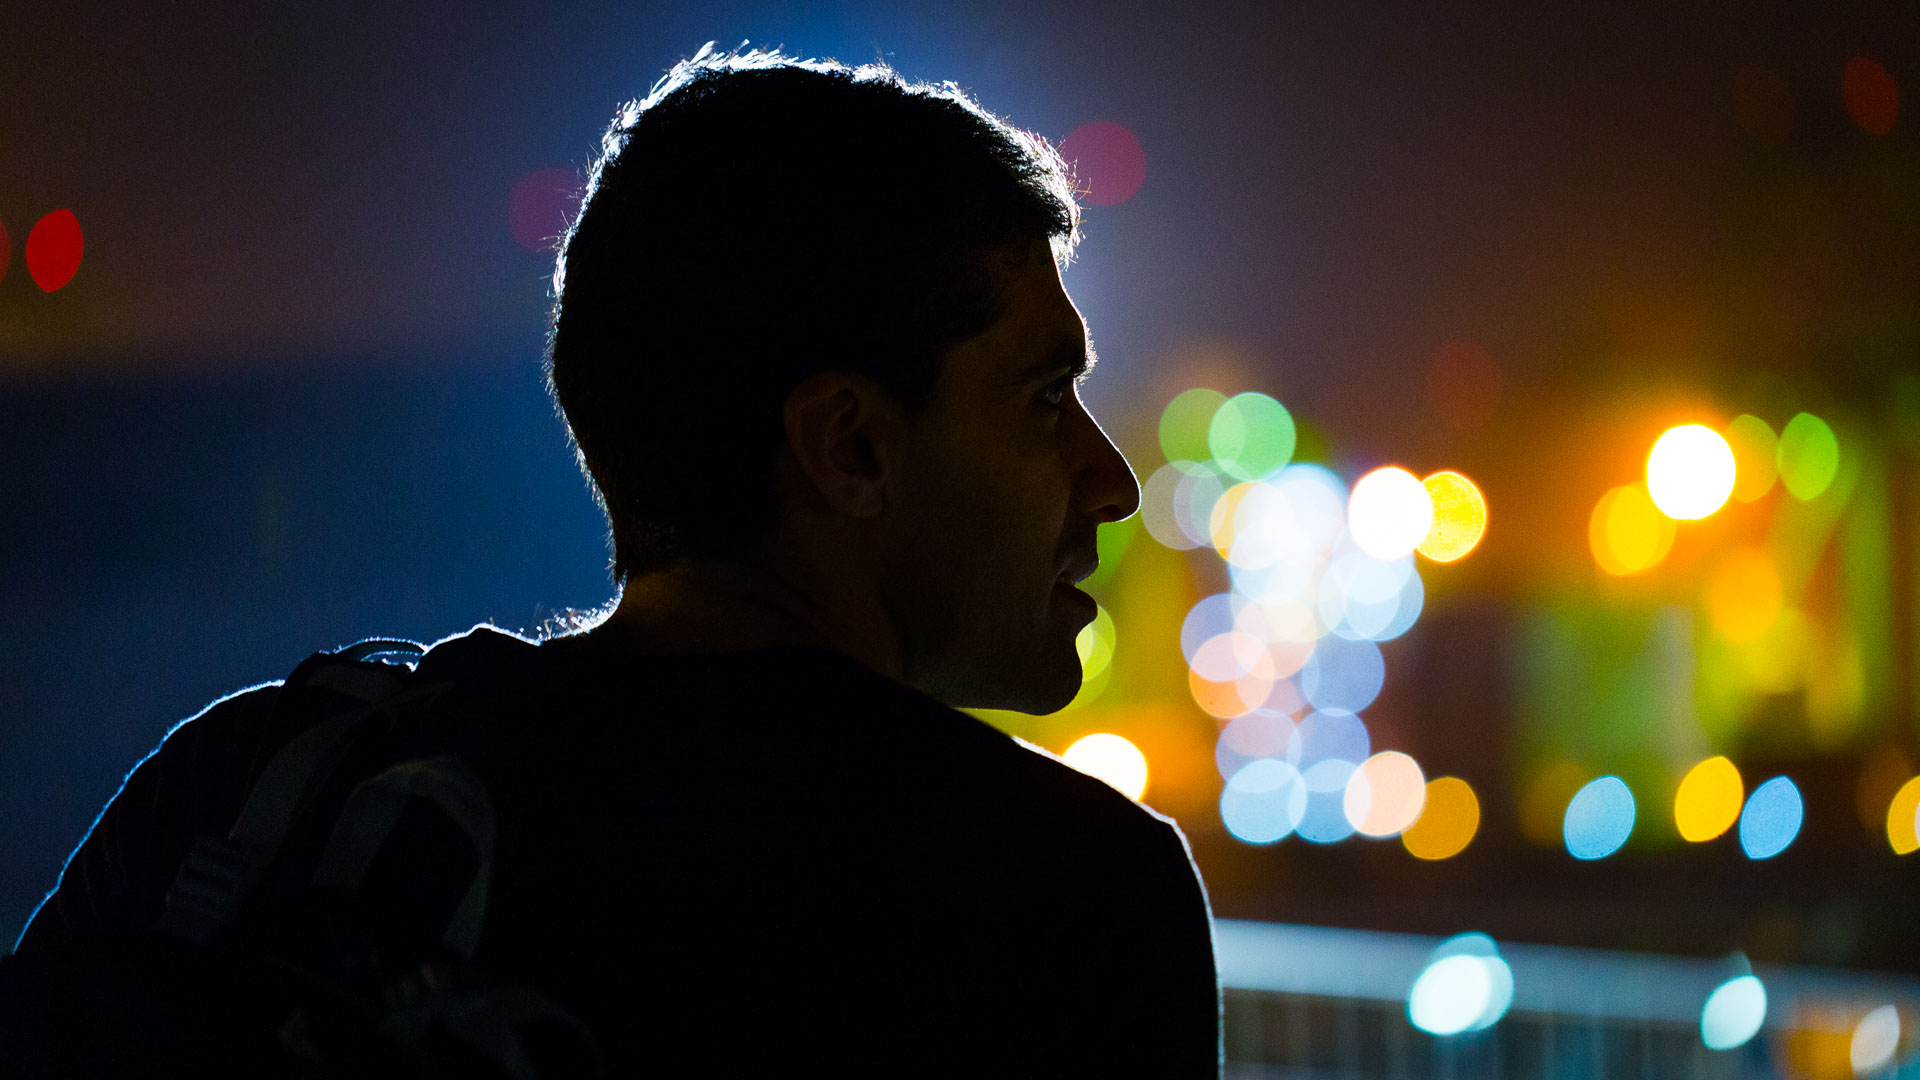 Dark silhouette of me from the shoulders up, with bokeh'd bright lights to my right